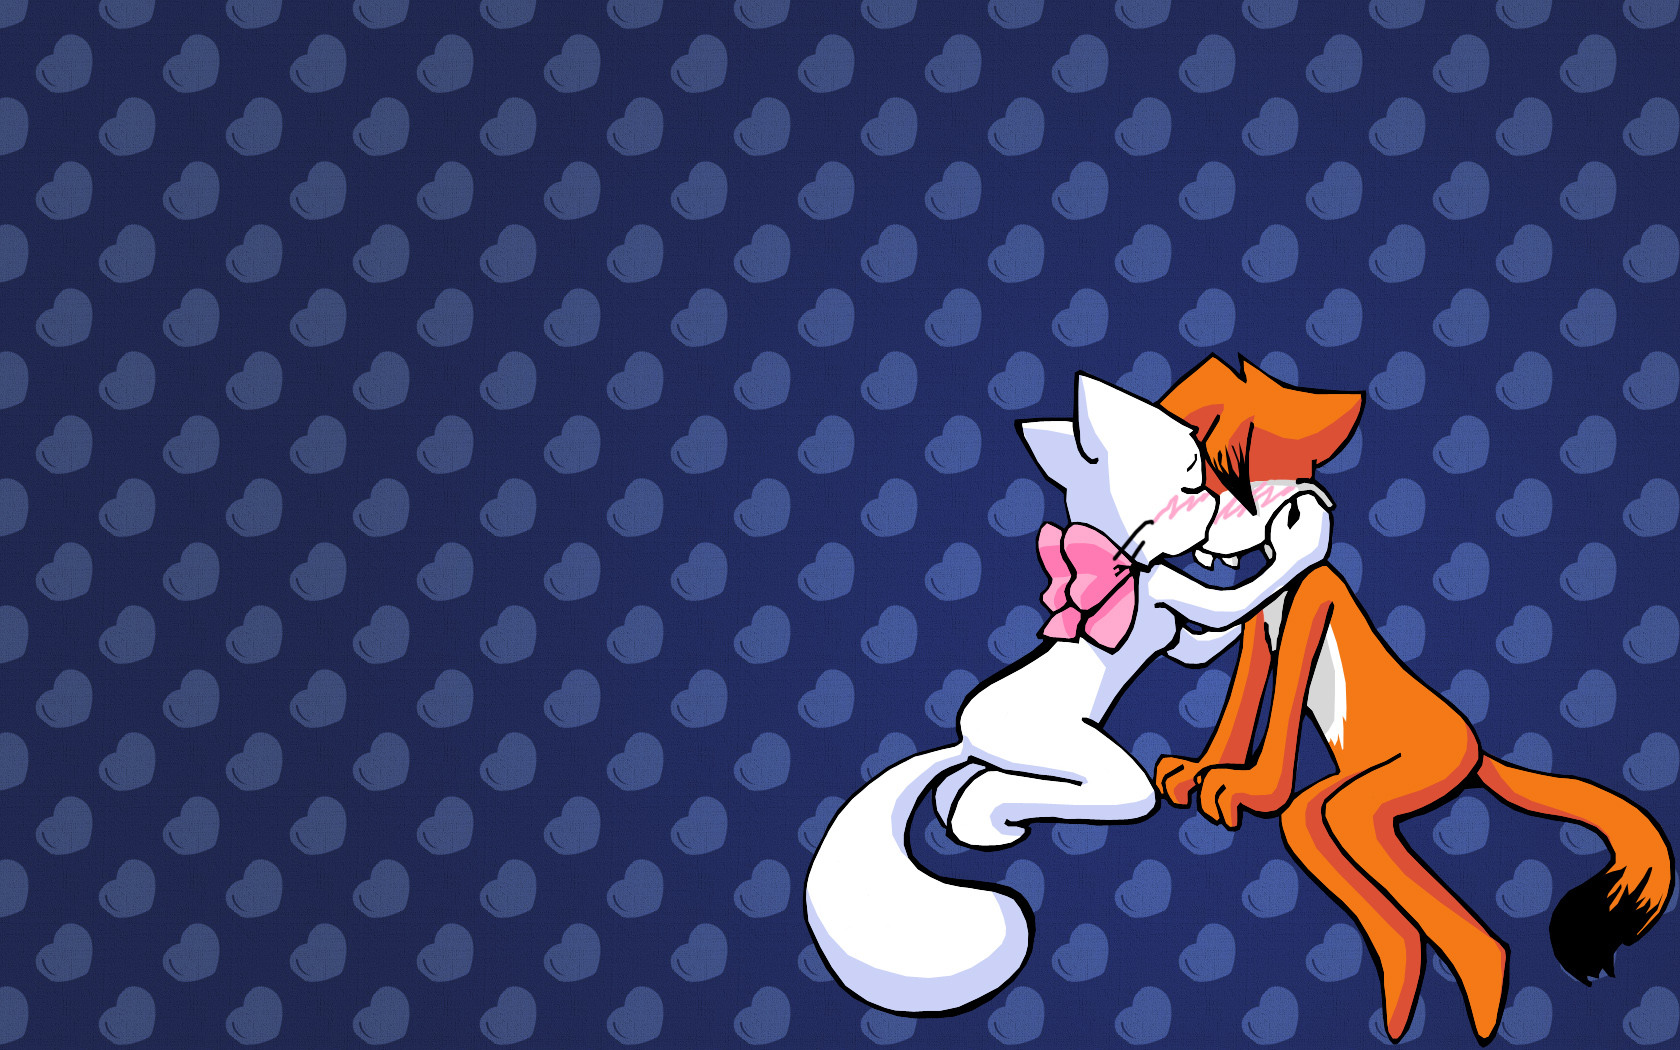 Candybooru image #773, tagged with Lucy Paulo PauloxLucy SpaceMouse_(Artist) kiss wallpaper